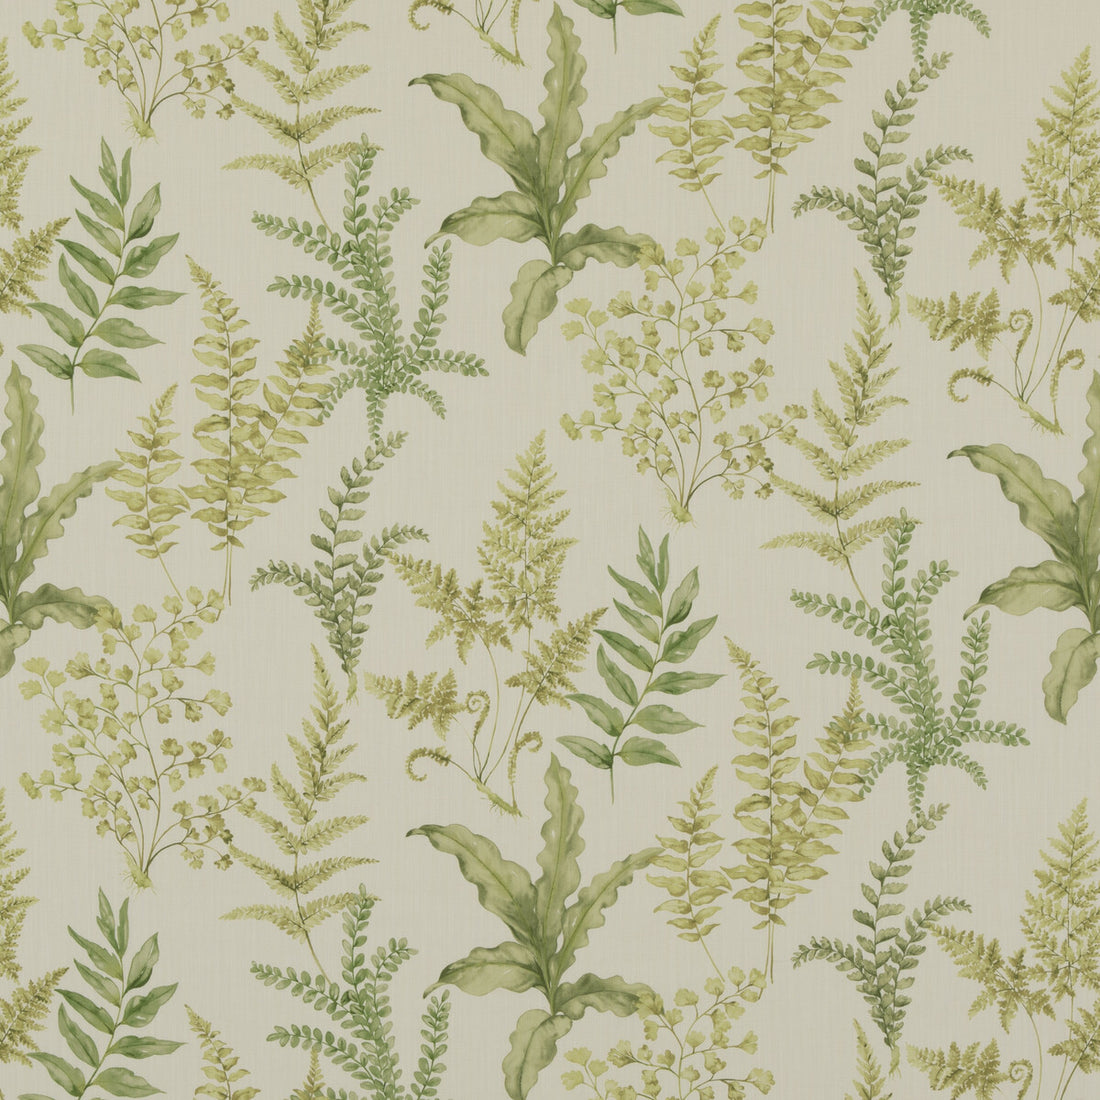 Ferndown fabric in green color - pattern PP50503.3.0 - by Baker Lifestyle in the Bridport collection